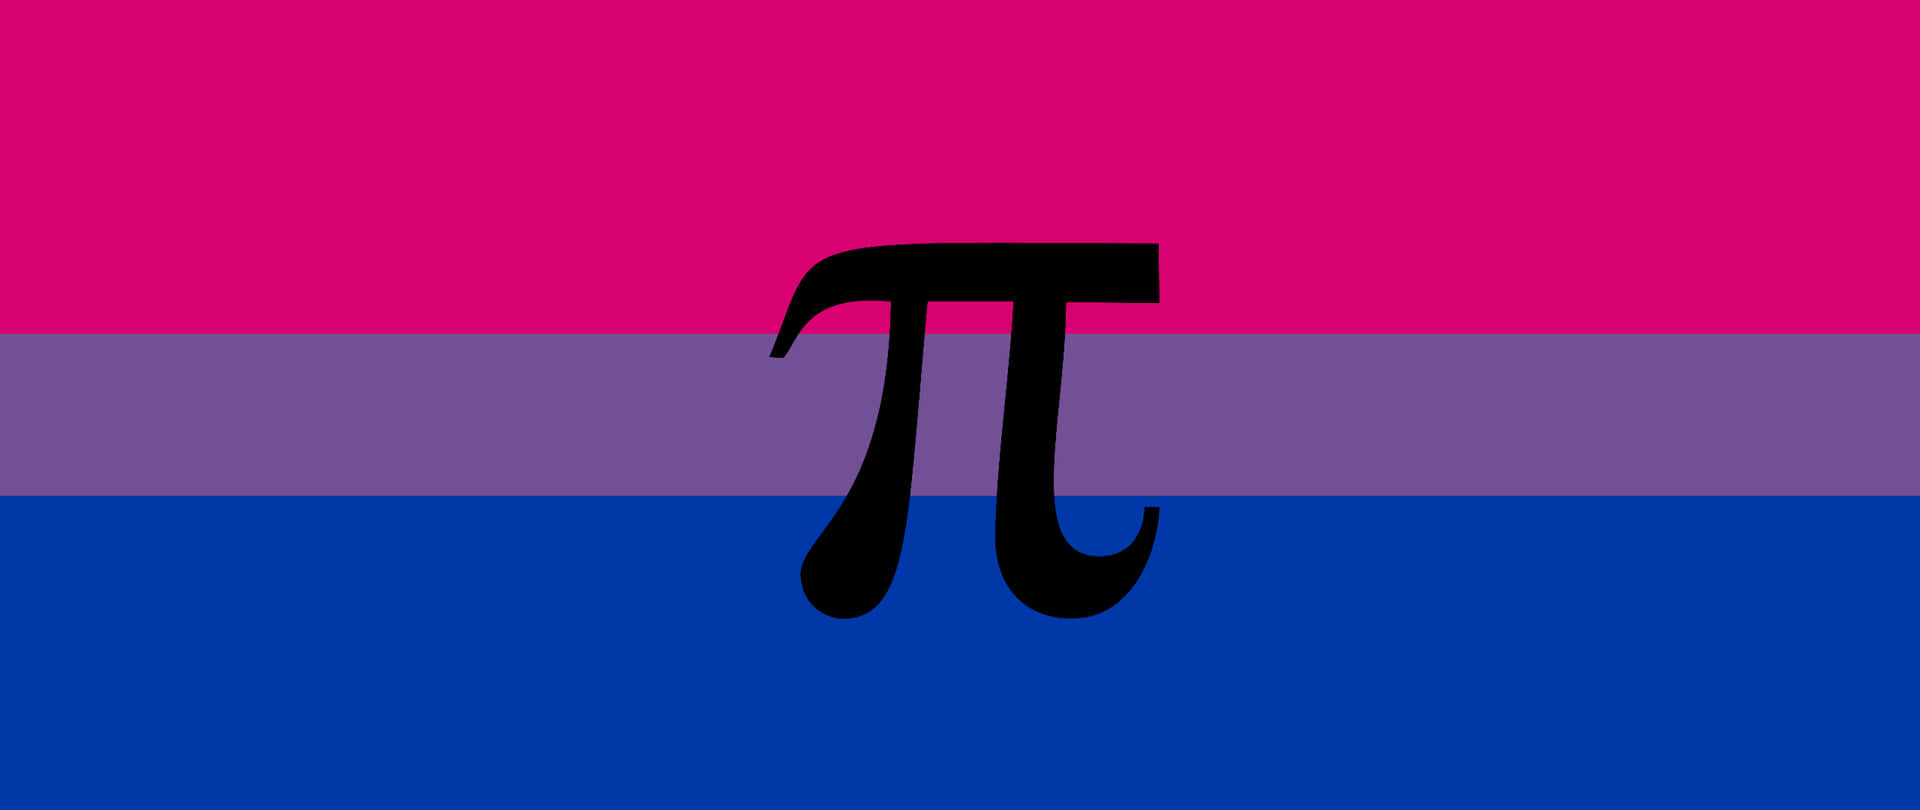 Pi Symbol On A Pink And Blue Flag Wallpaper